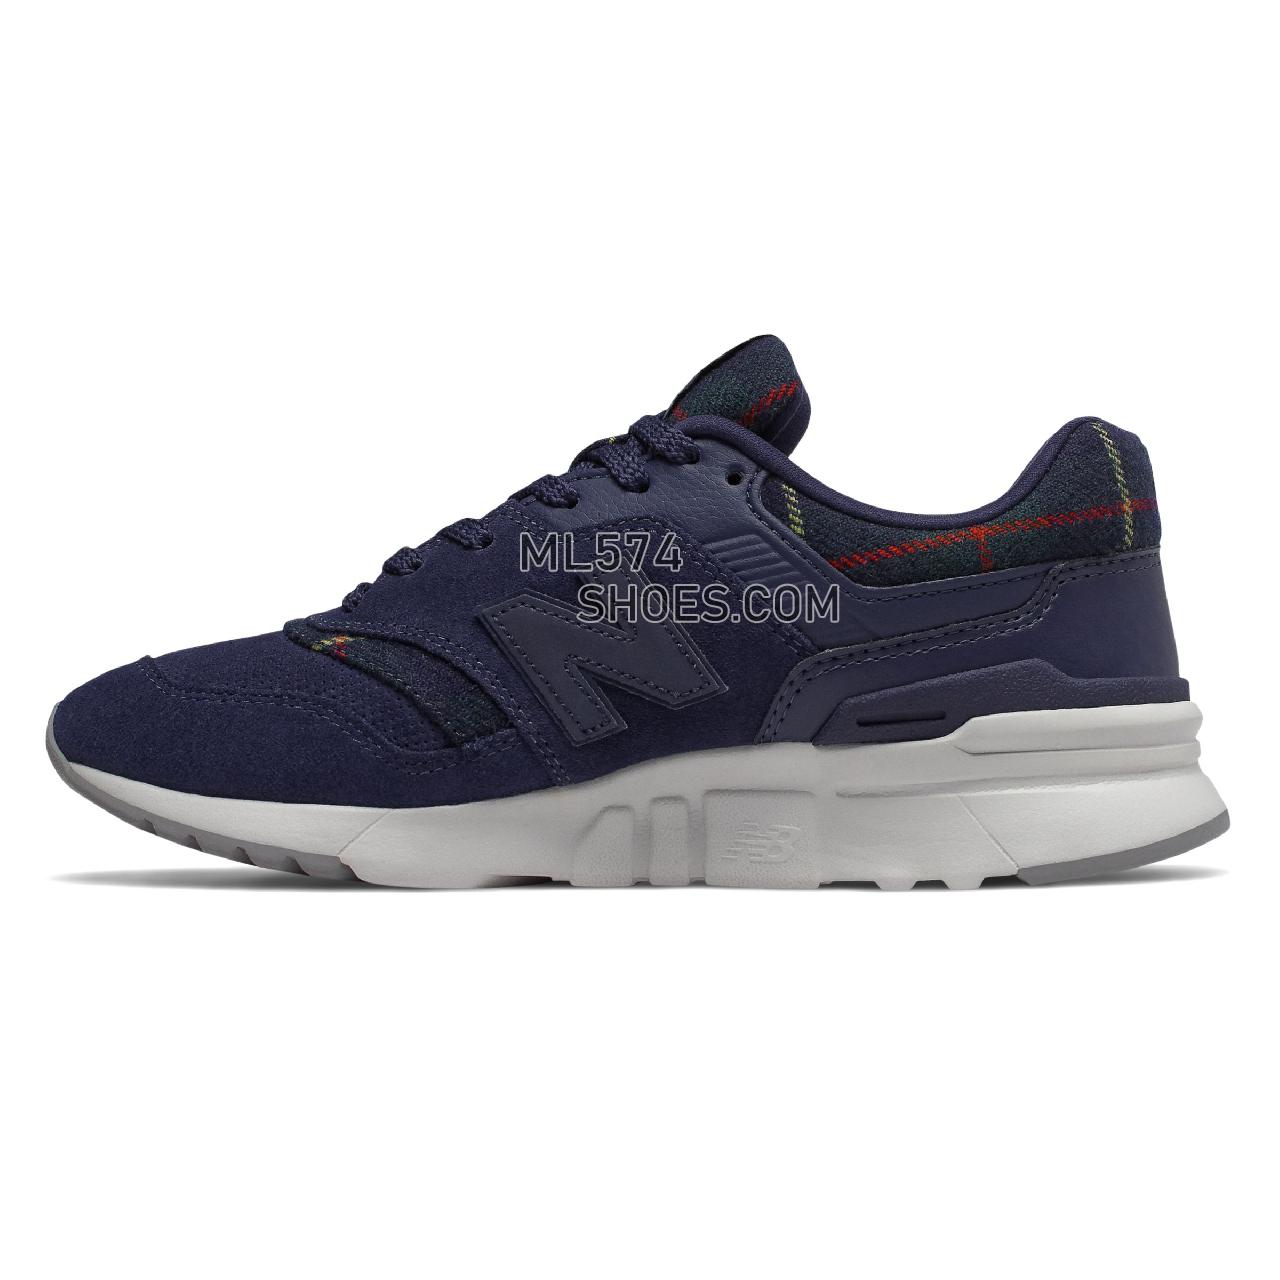 New Balance 997H - Women's Classic Sneakers - Pigment with Navy - CW997HXT